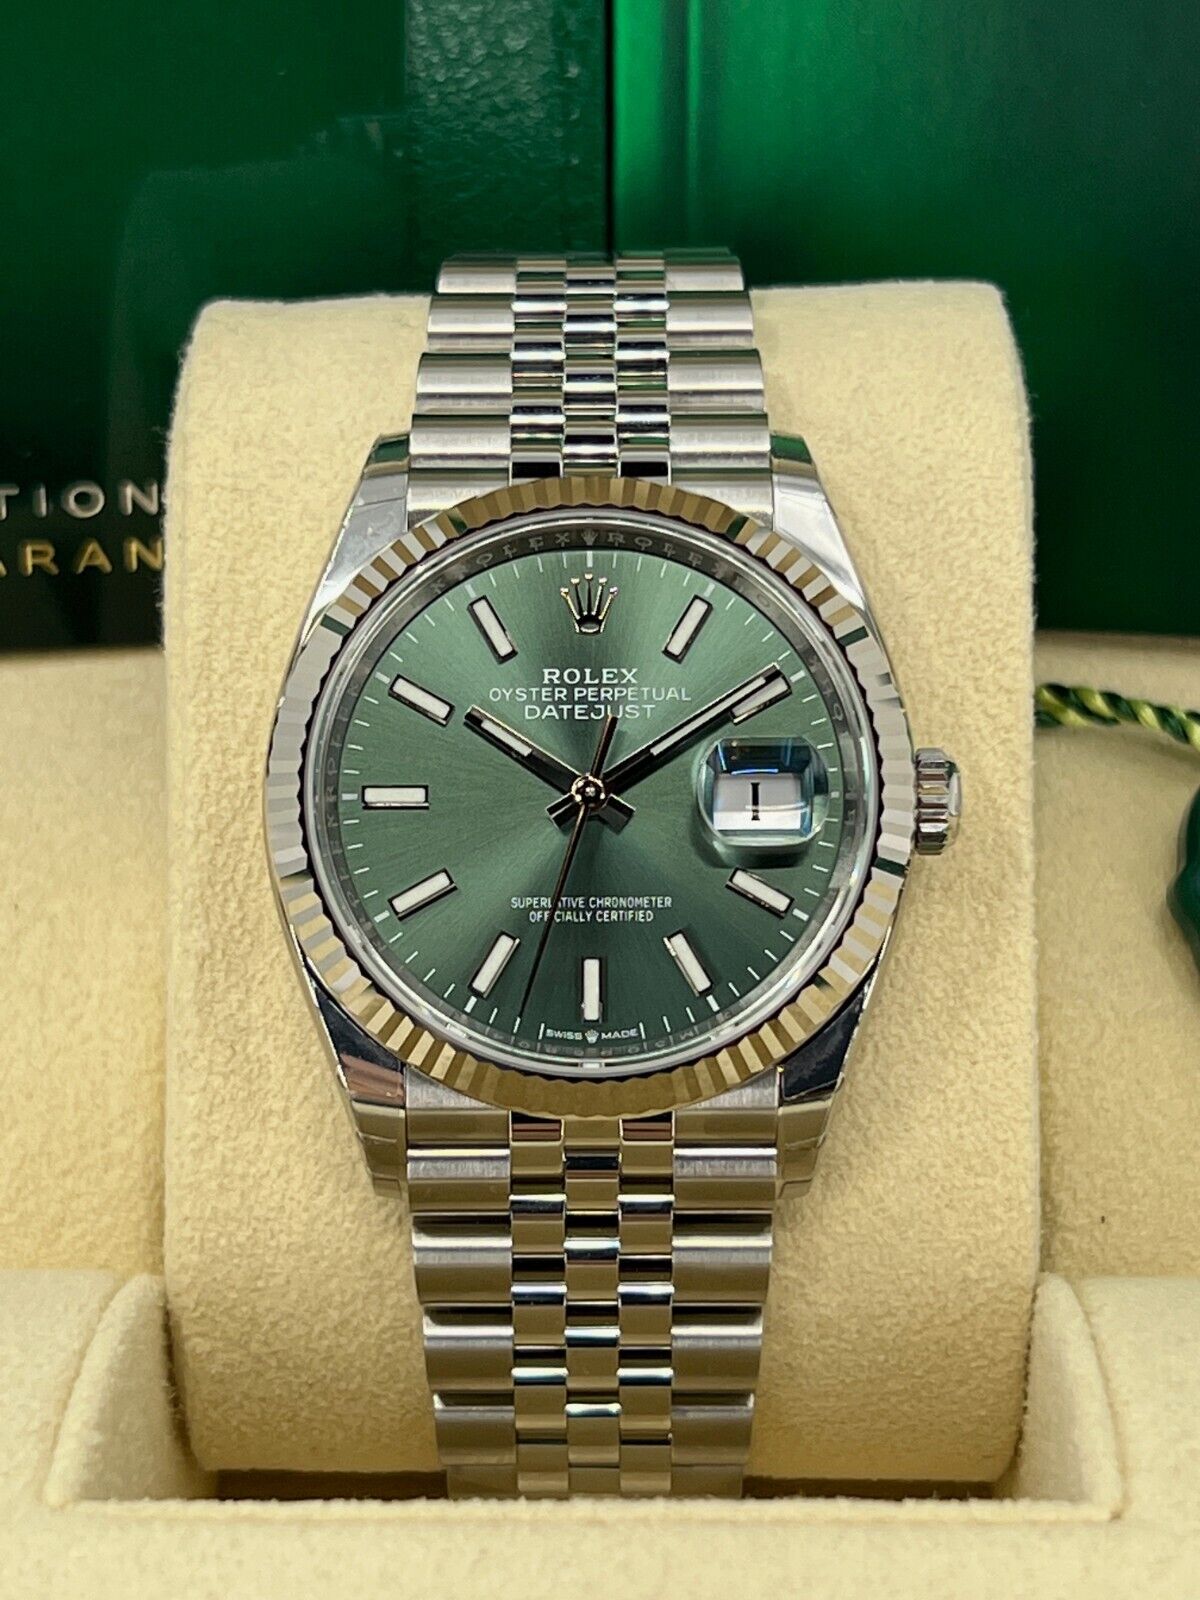 Rolex, Datejust 36, Oystersteel and 18k White Gold, 36mm, Green Mint Dial, Fluted, Jubilee, Ref# 126234-0051, Dial